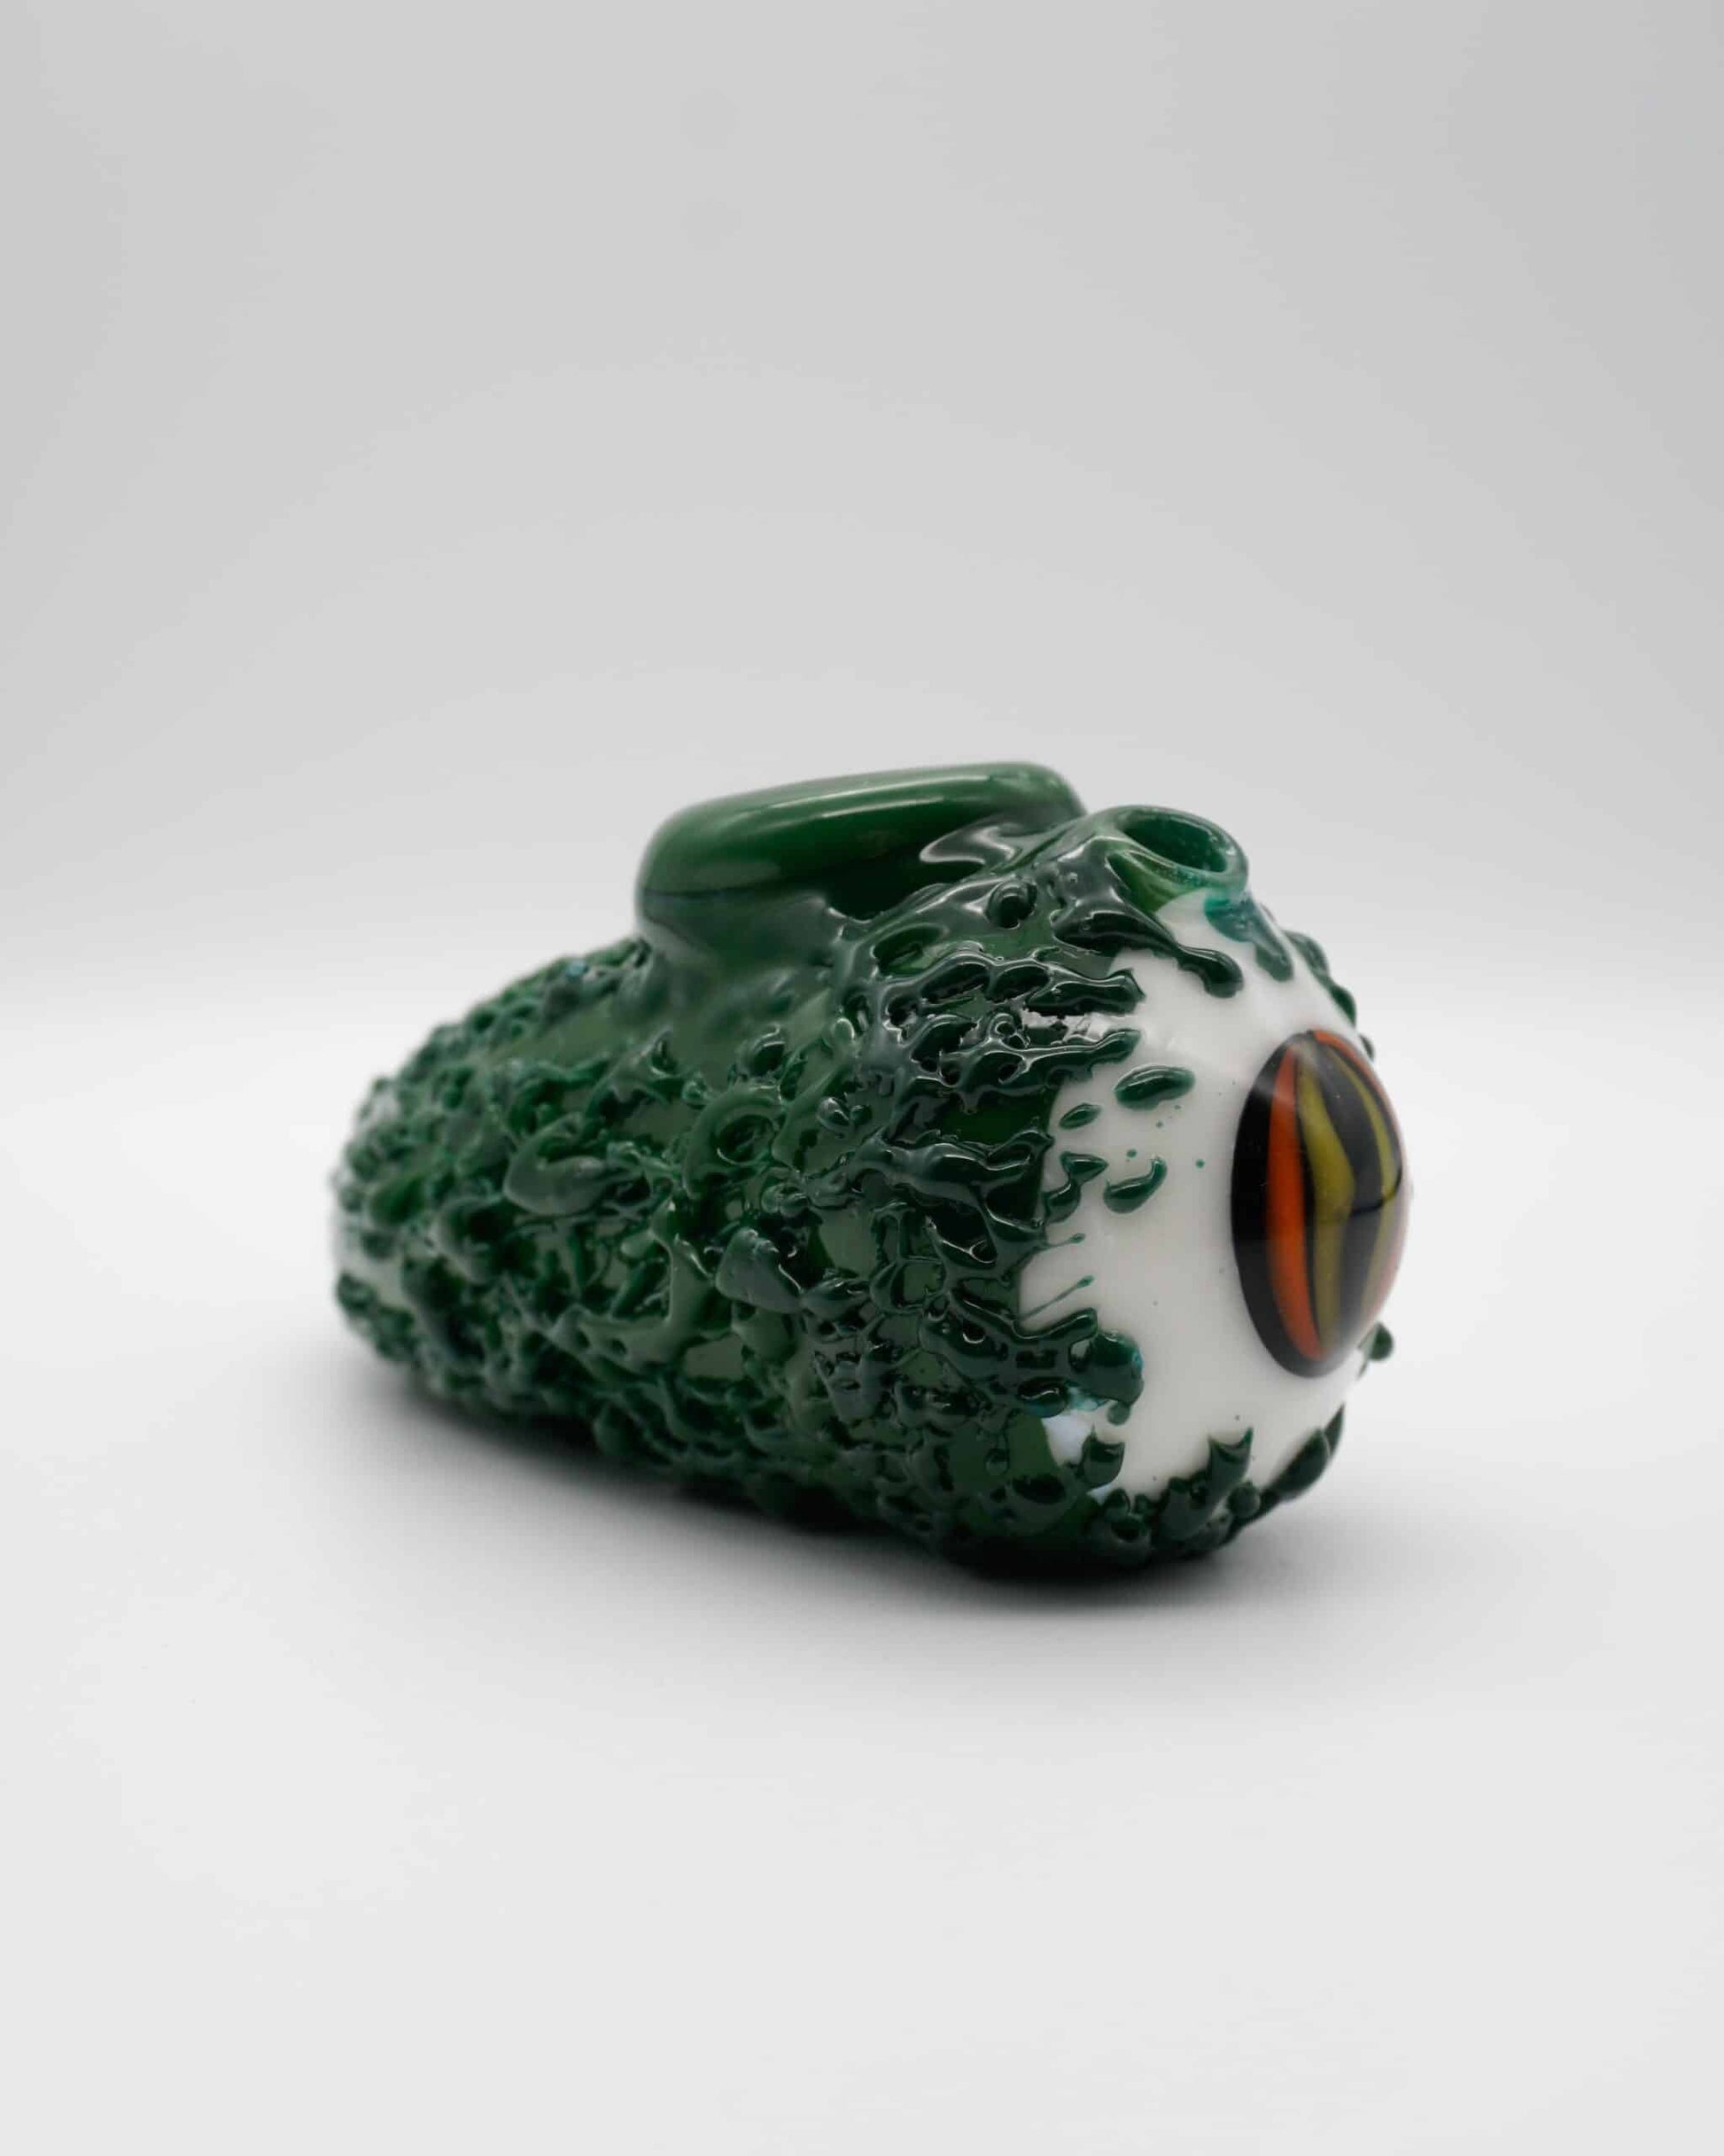 exquisite design of the (M1) Green Eyeball Travel Rig by Merc